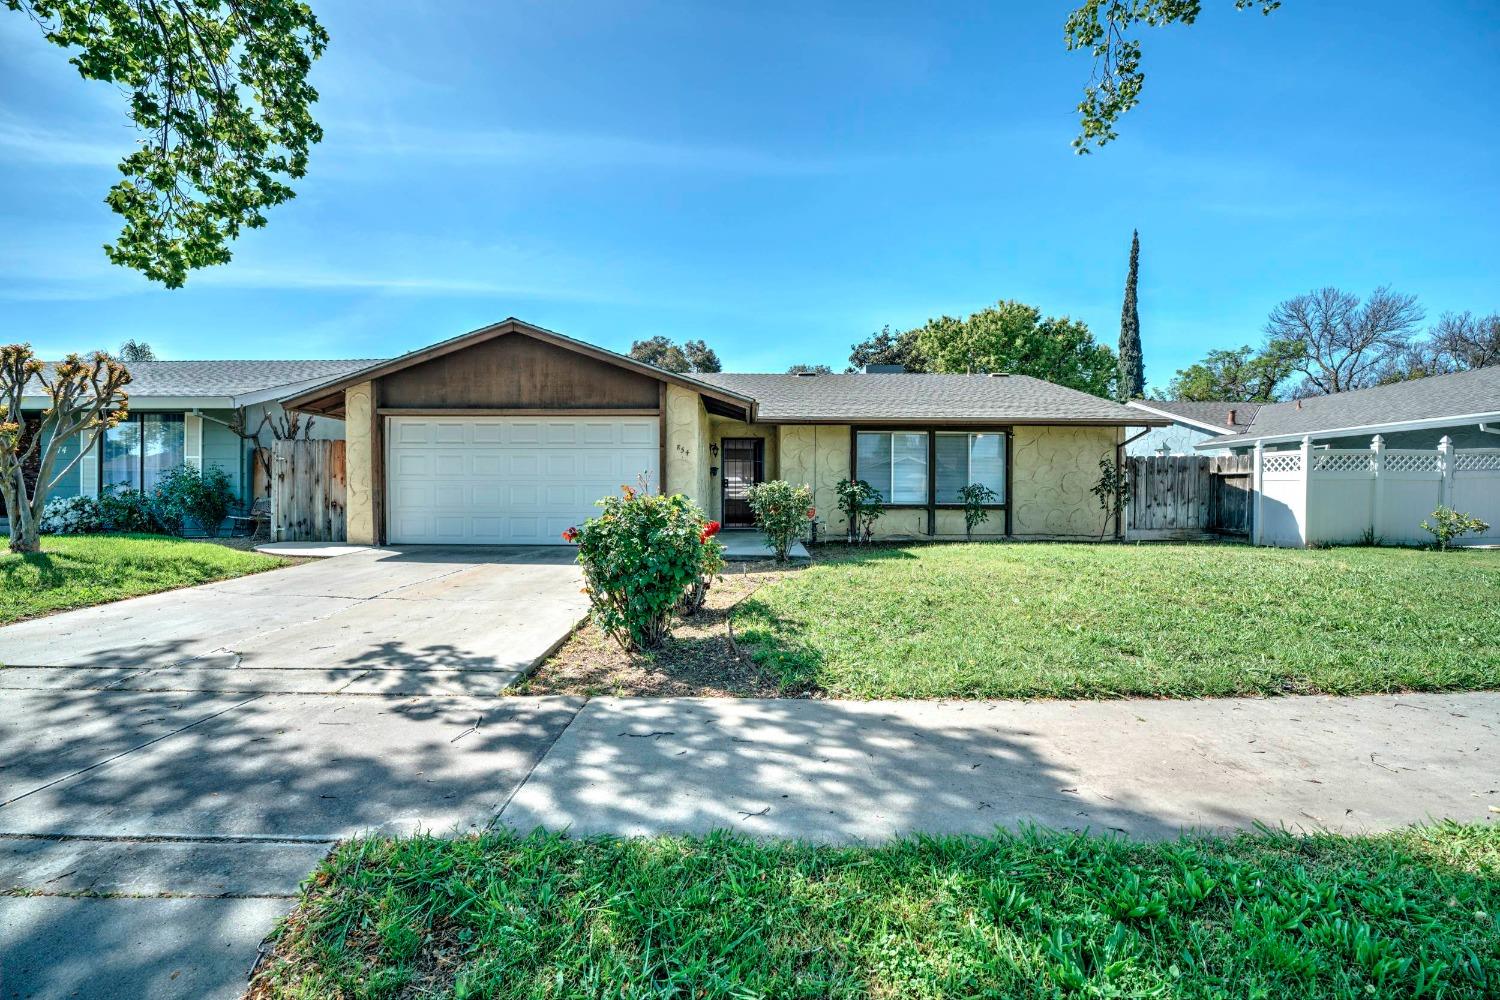 Photo of 854 Columbia Ave in Merced, CA